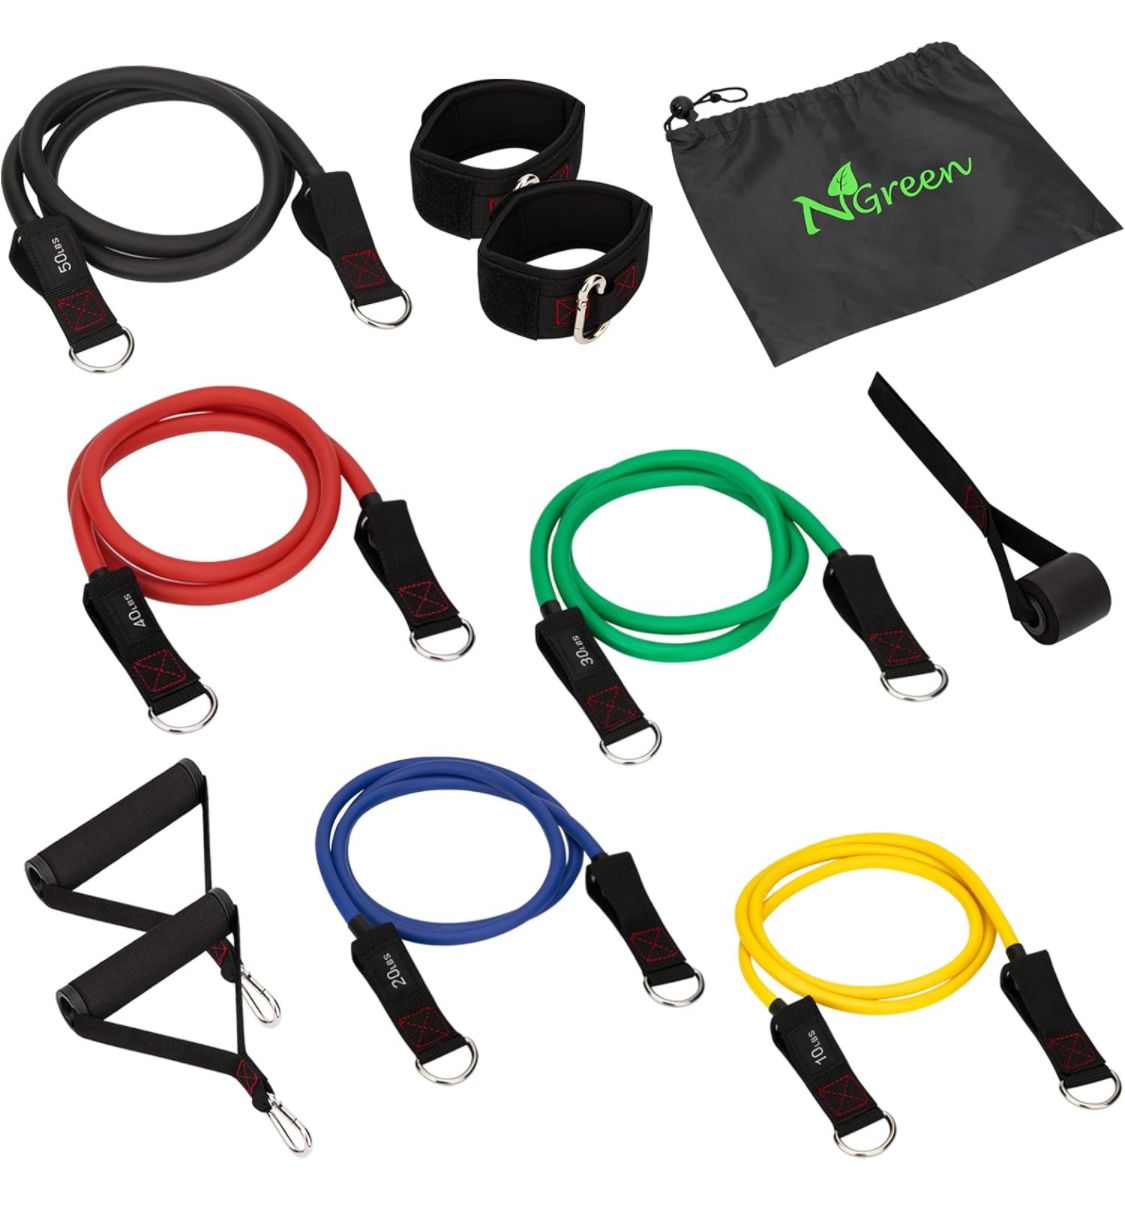 New! Workout Resistance Band Set - Anti-Snap Exercise Bands with Handles, Door Anchor, Ankle Straps, Training Tubes for Fitness Home Gym, Muscle Build